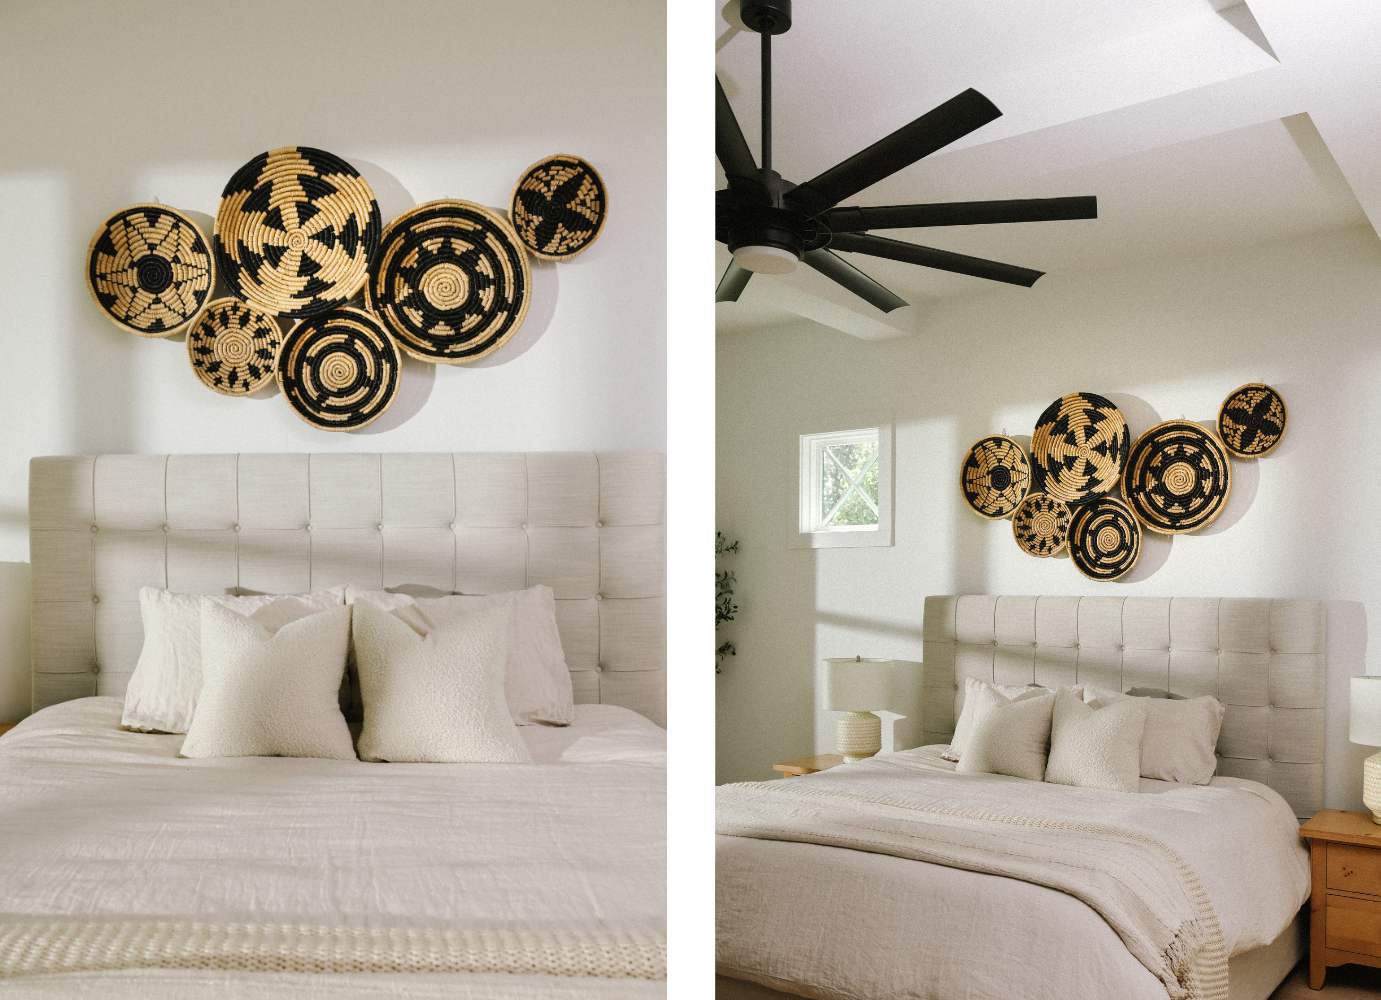 Large wicker wall decor in the bedroom